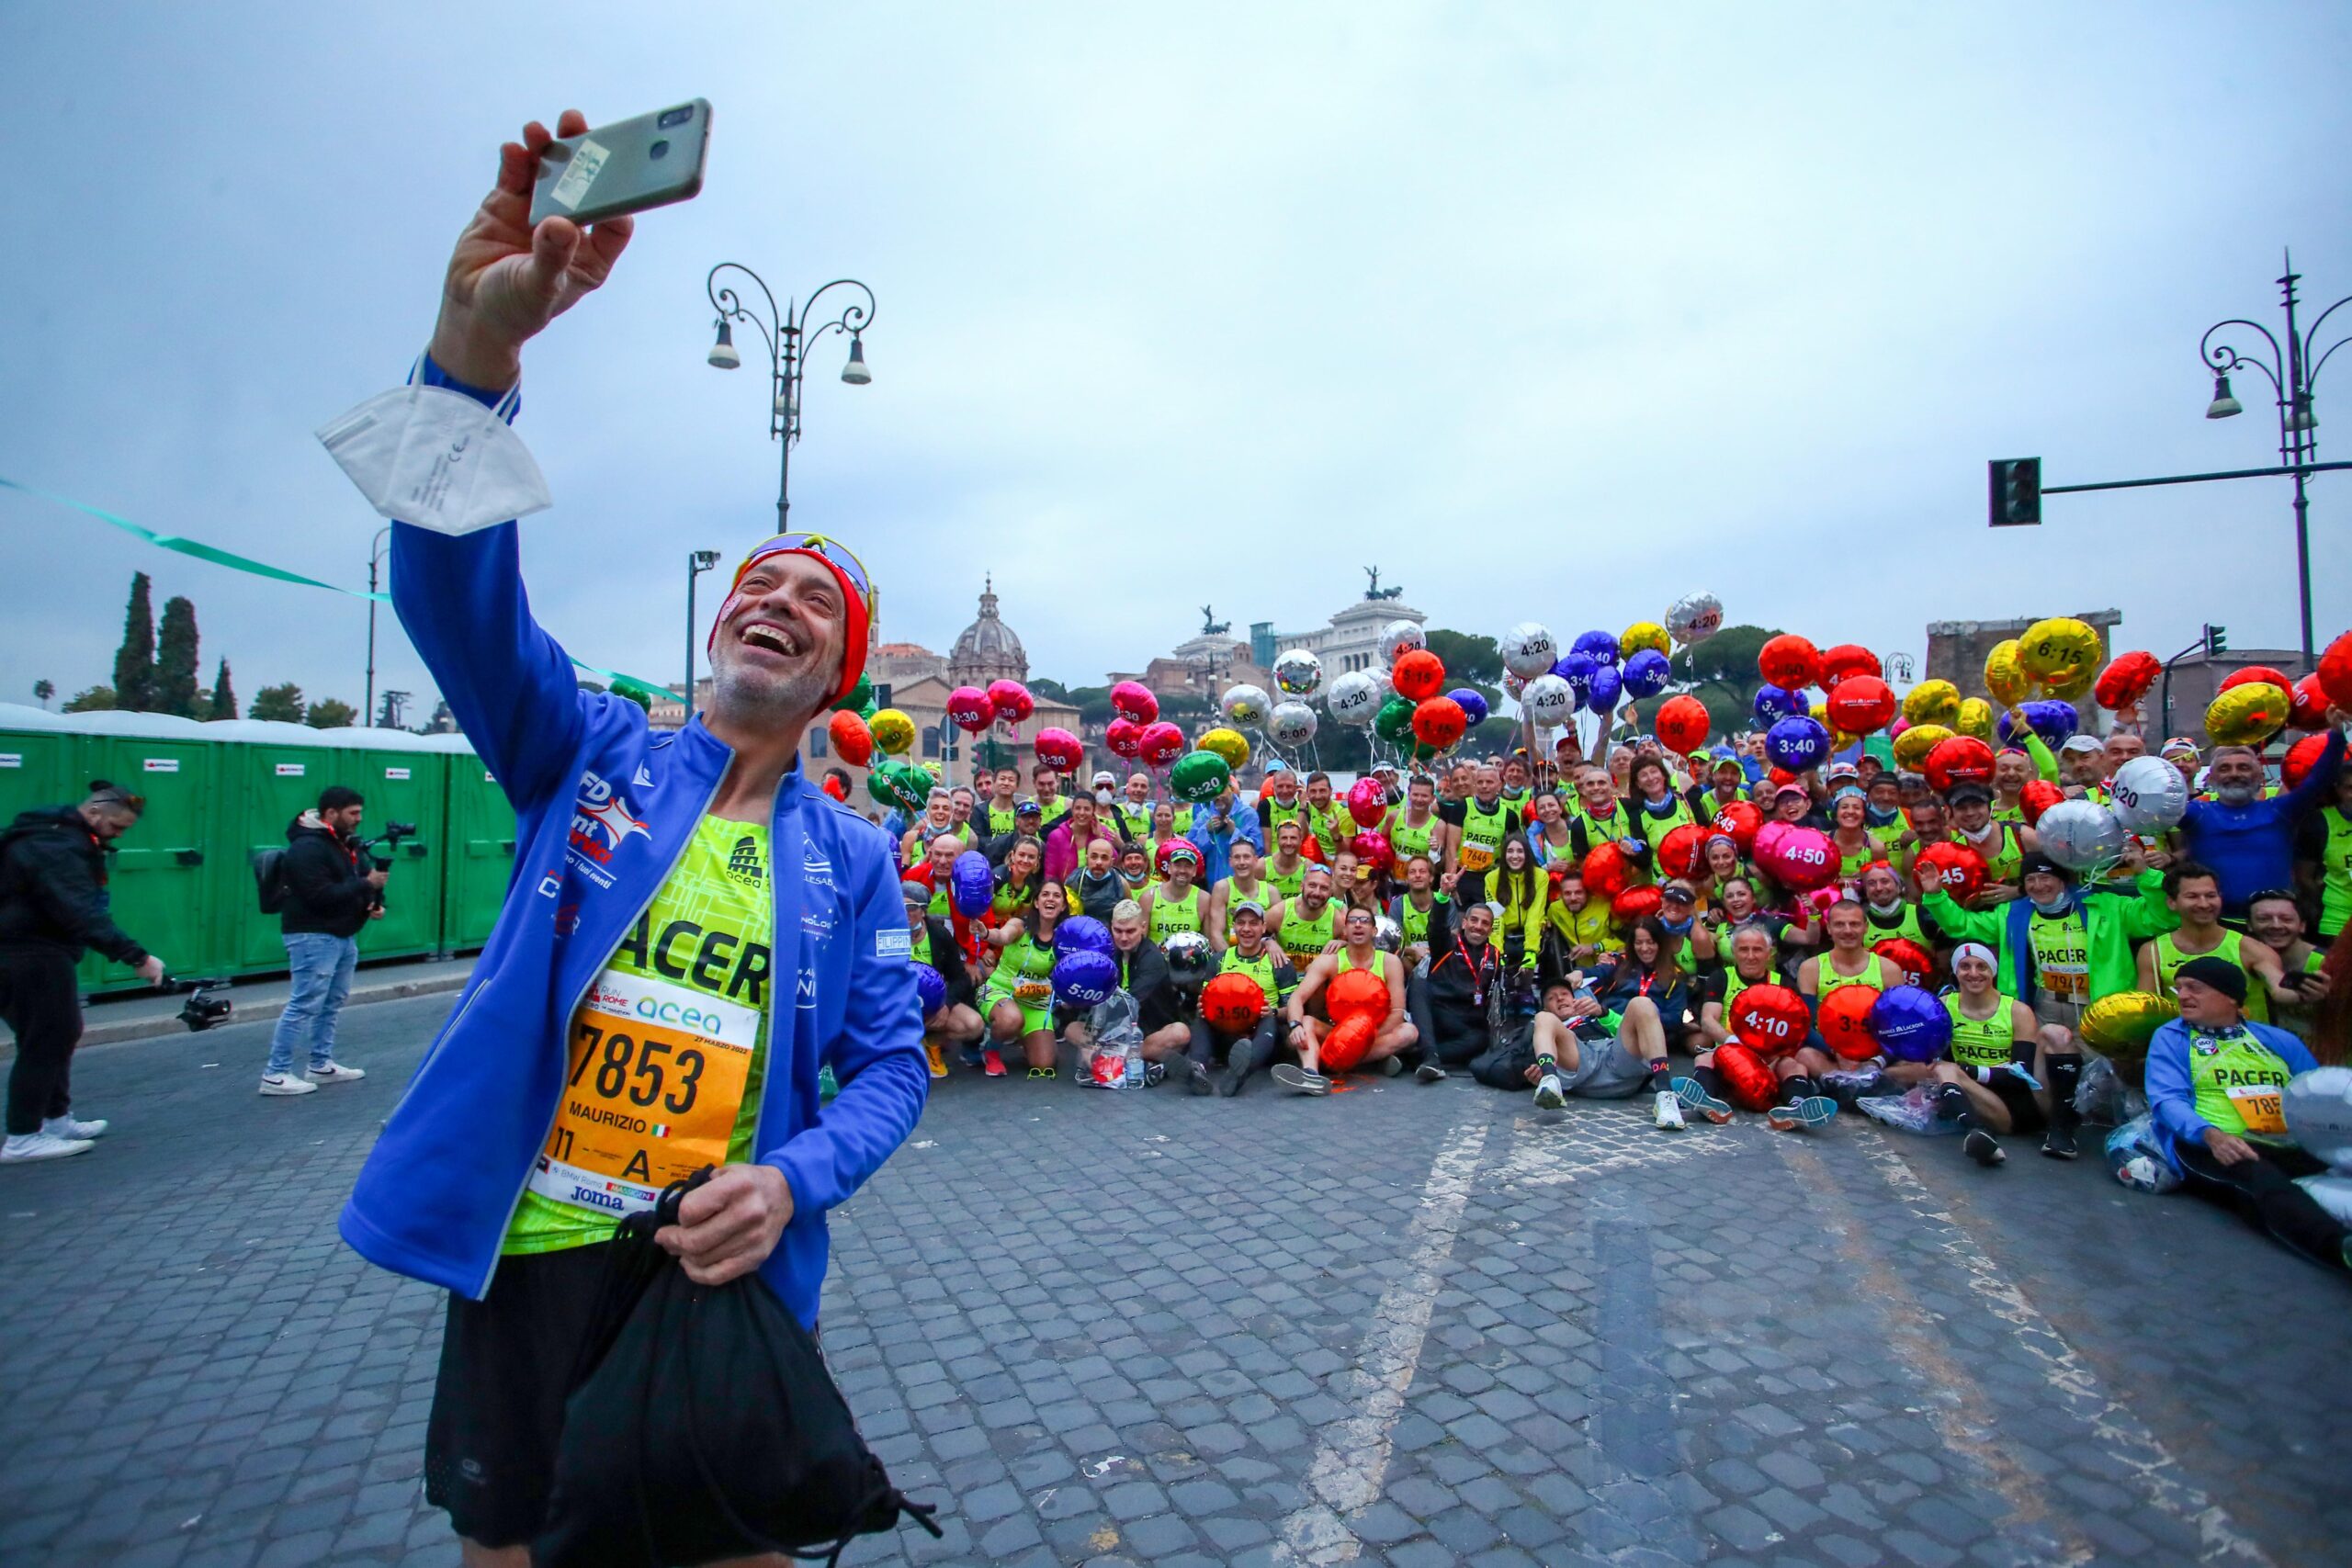 Call For Pacer, nominations for the role of Pacer for Run Rome The Marathon 2023 are open